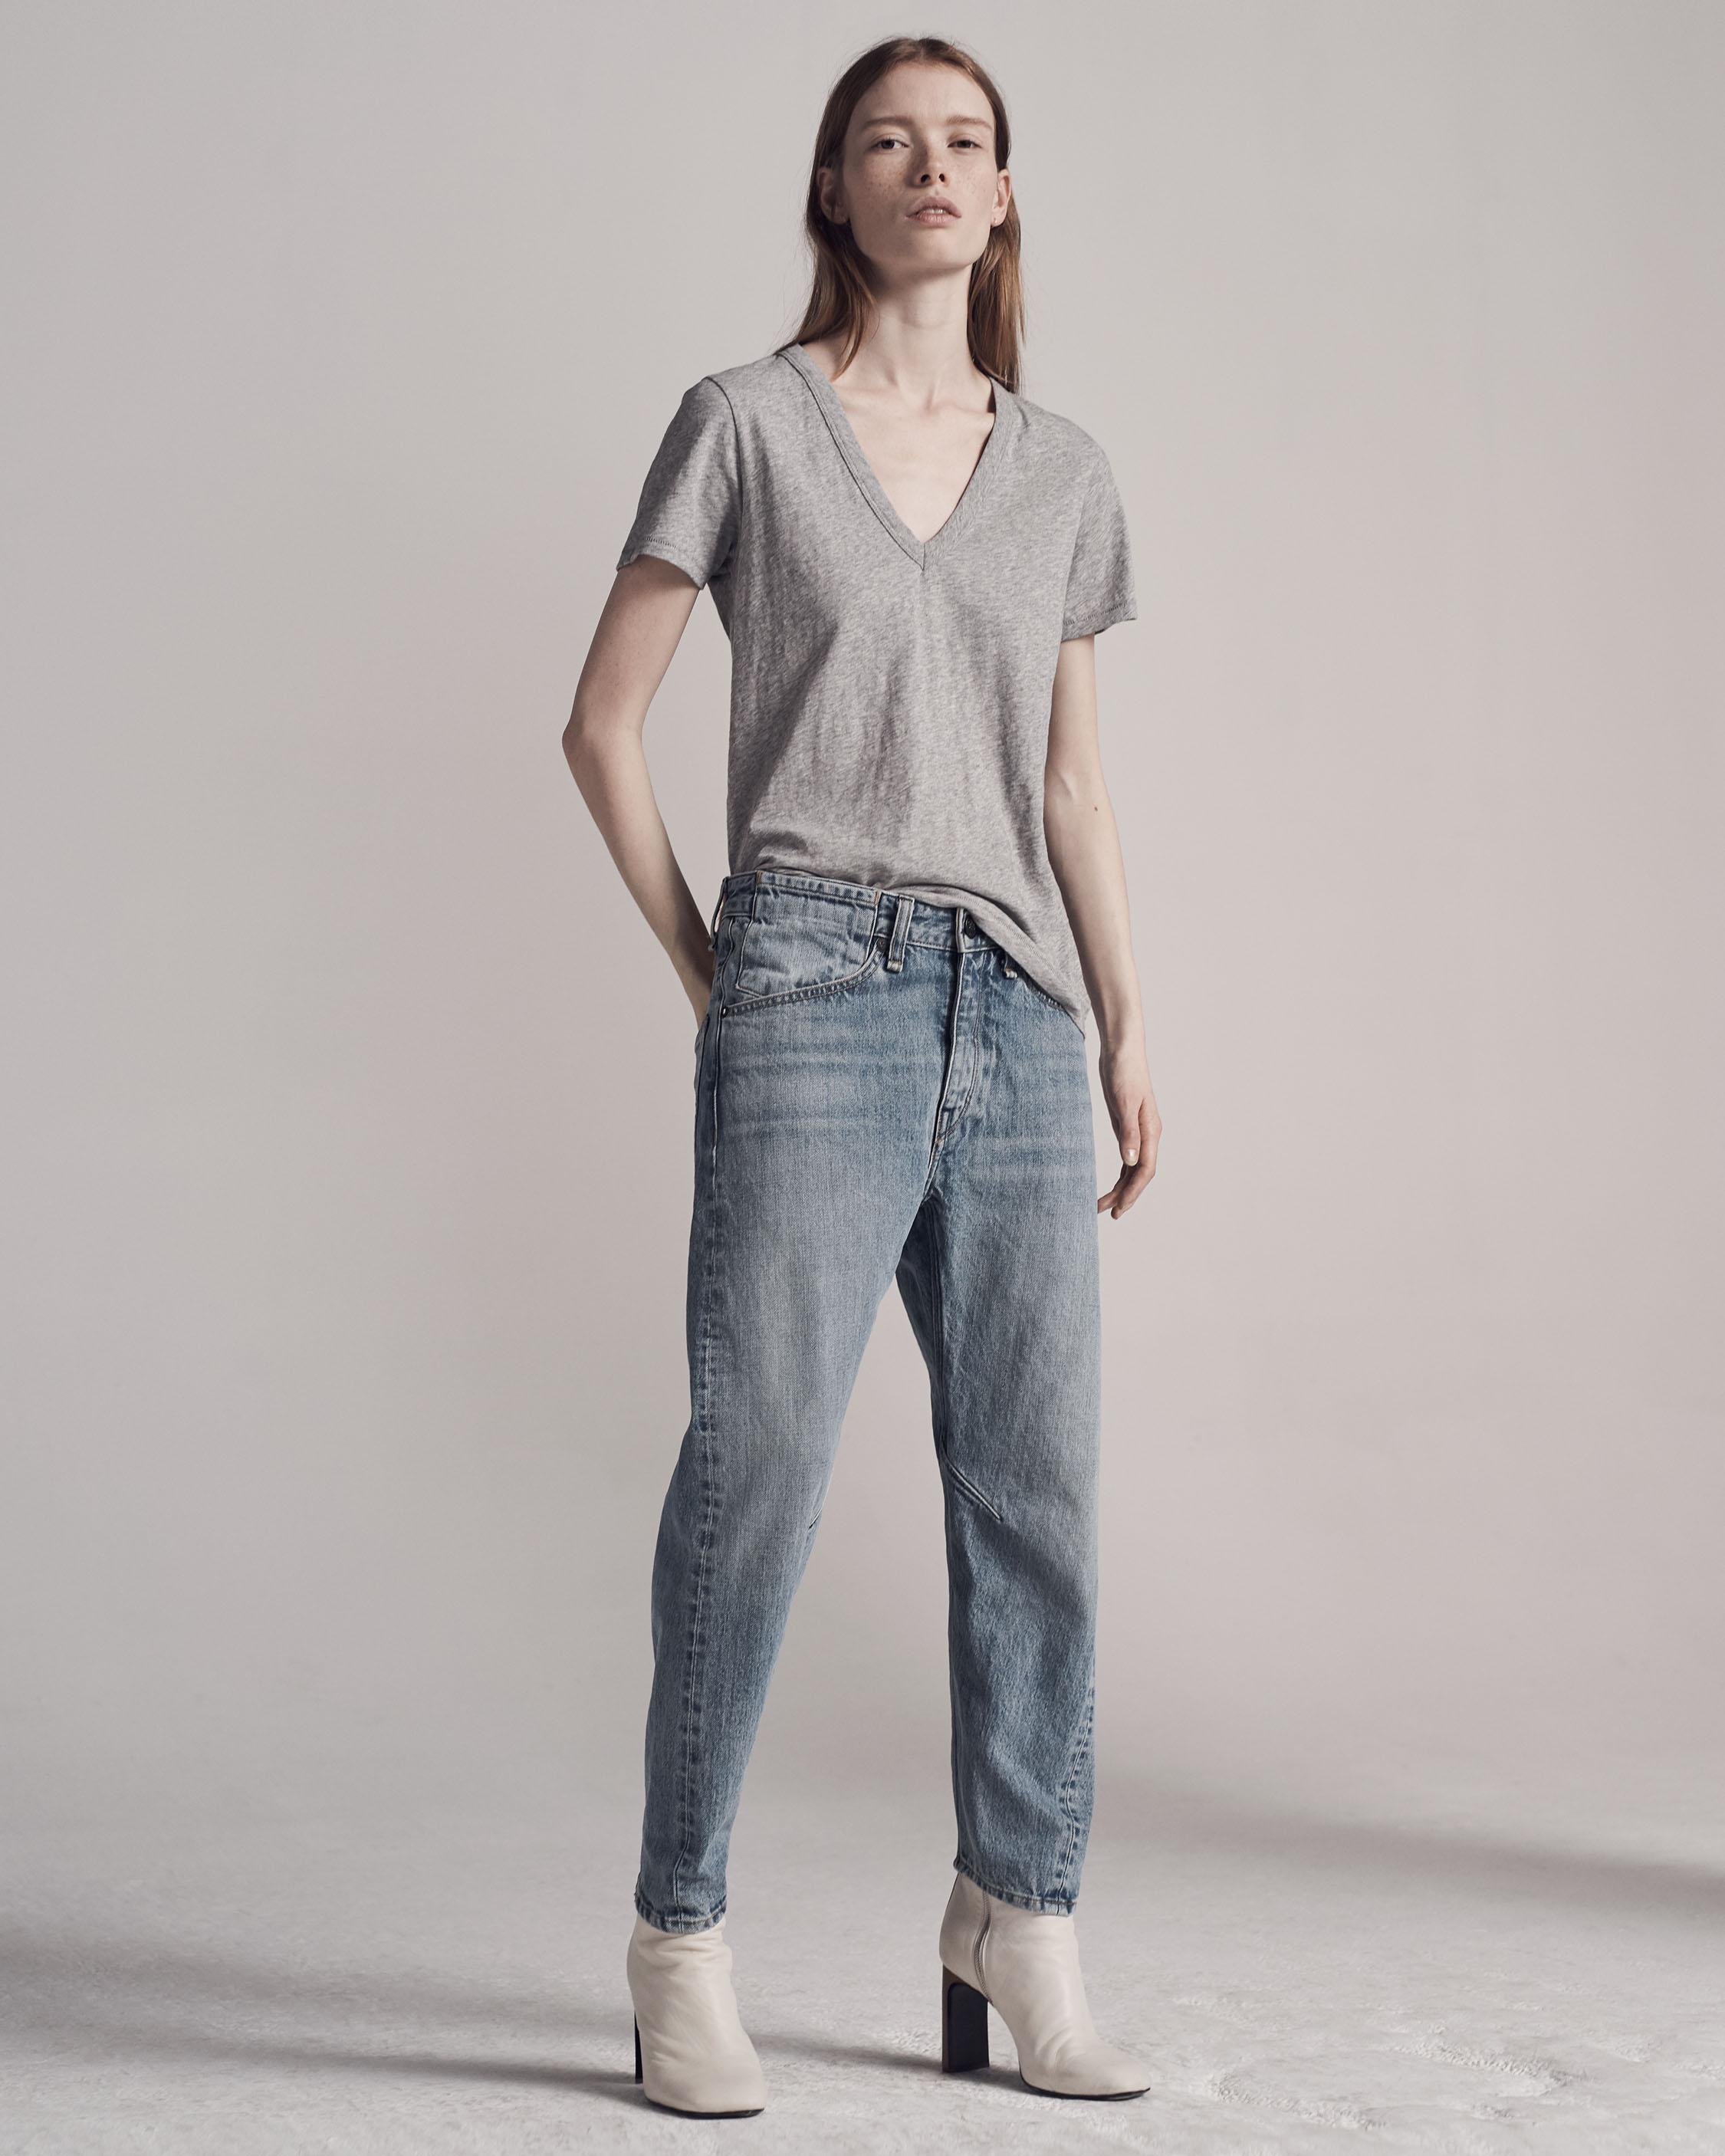 Jeans: Ankle Cut to Skinny, High Rise to Boyfriend & Crop with Urban ...